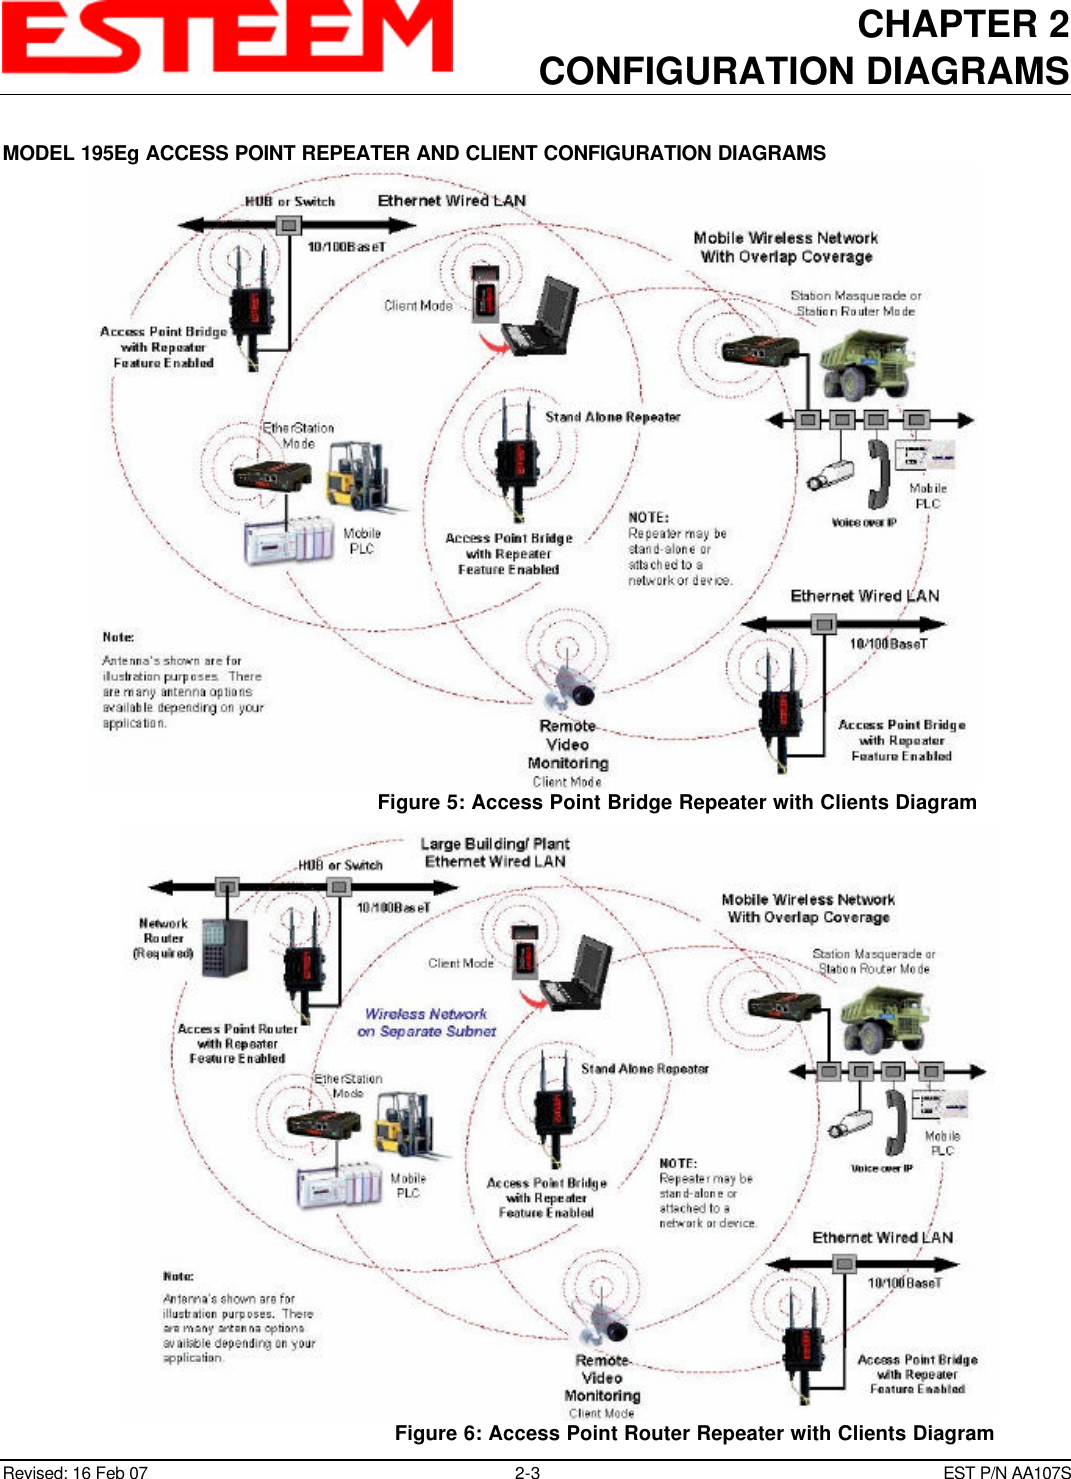 CHAPTER 2CONFIGURATION DIAGRAMSRevised: 16 Feb 07 2-3EST P/N AA107SMODEL 195Eg ACCESS POINT REPEATER AND CLIENT CONFIGURATION DIAGRAMSFigure 5: Access Point Bridge Repeater with Clients DiagramFigure 6: Access Point Router Repeater with Clients Diagram